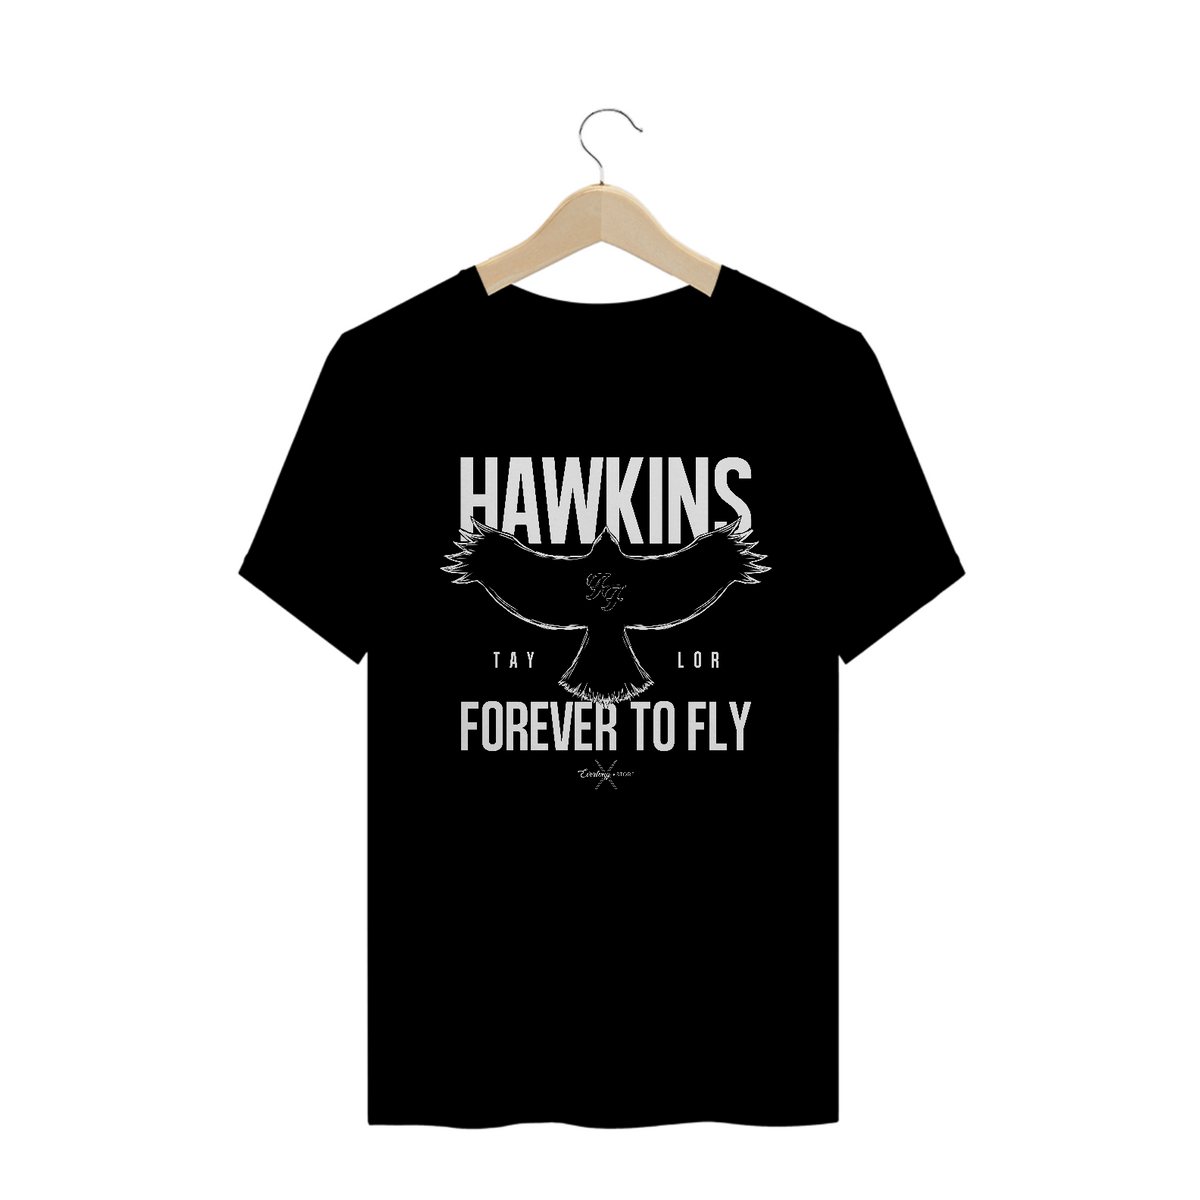 Nome do produto: Hawkings Forever to Fly